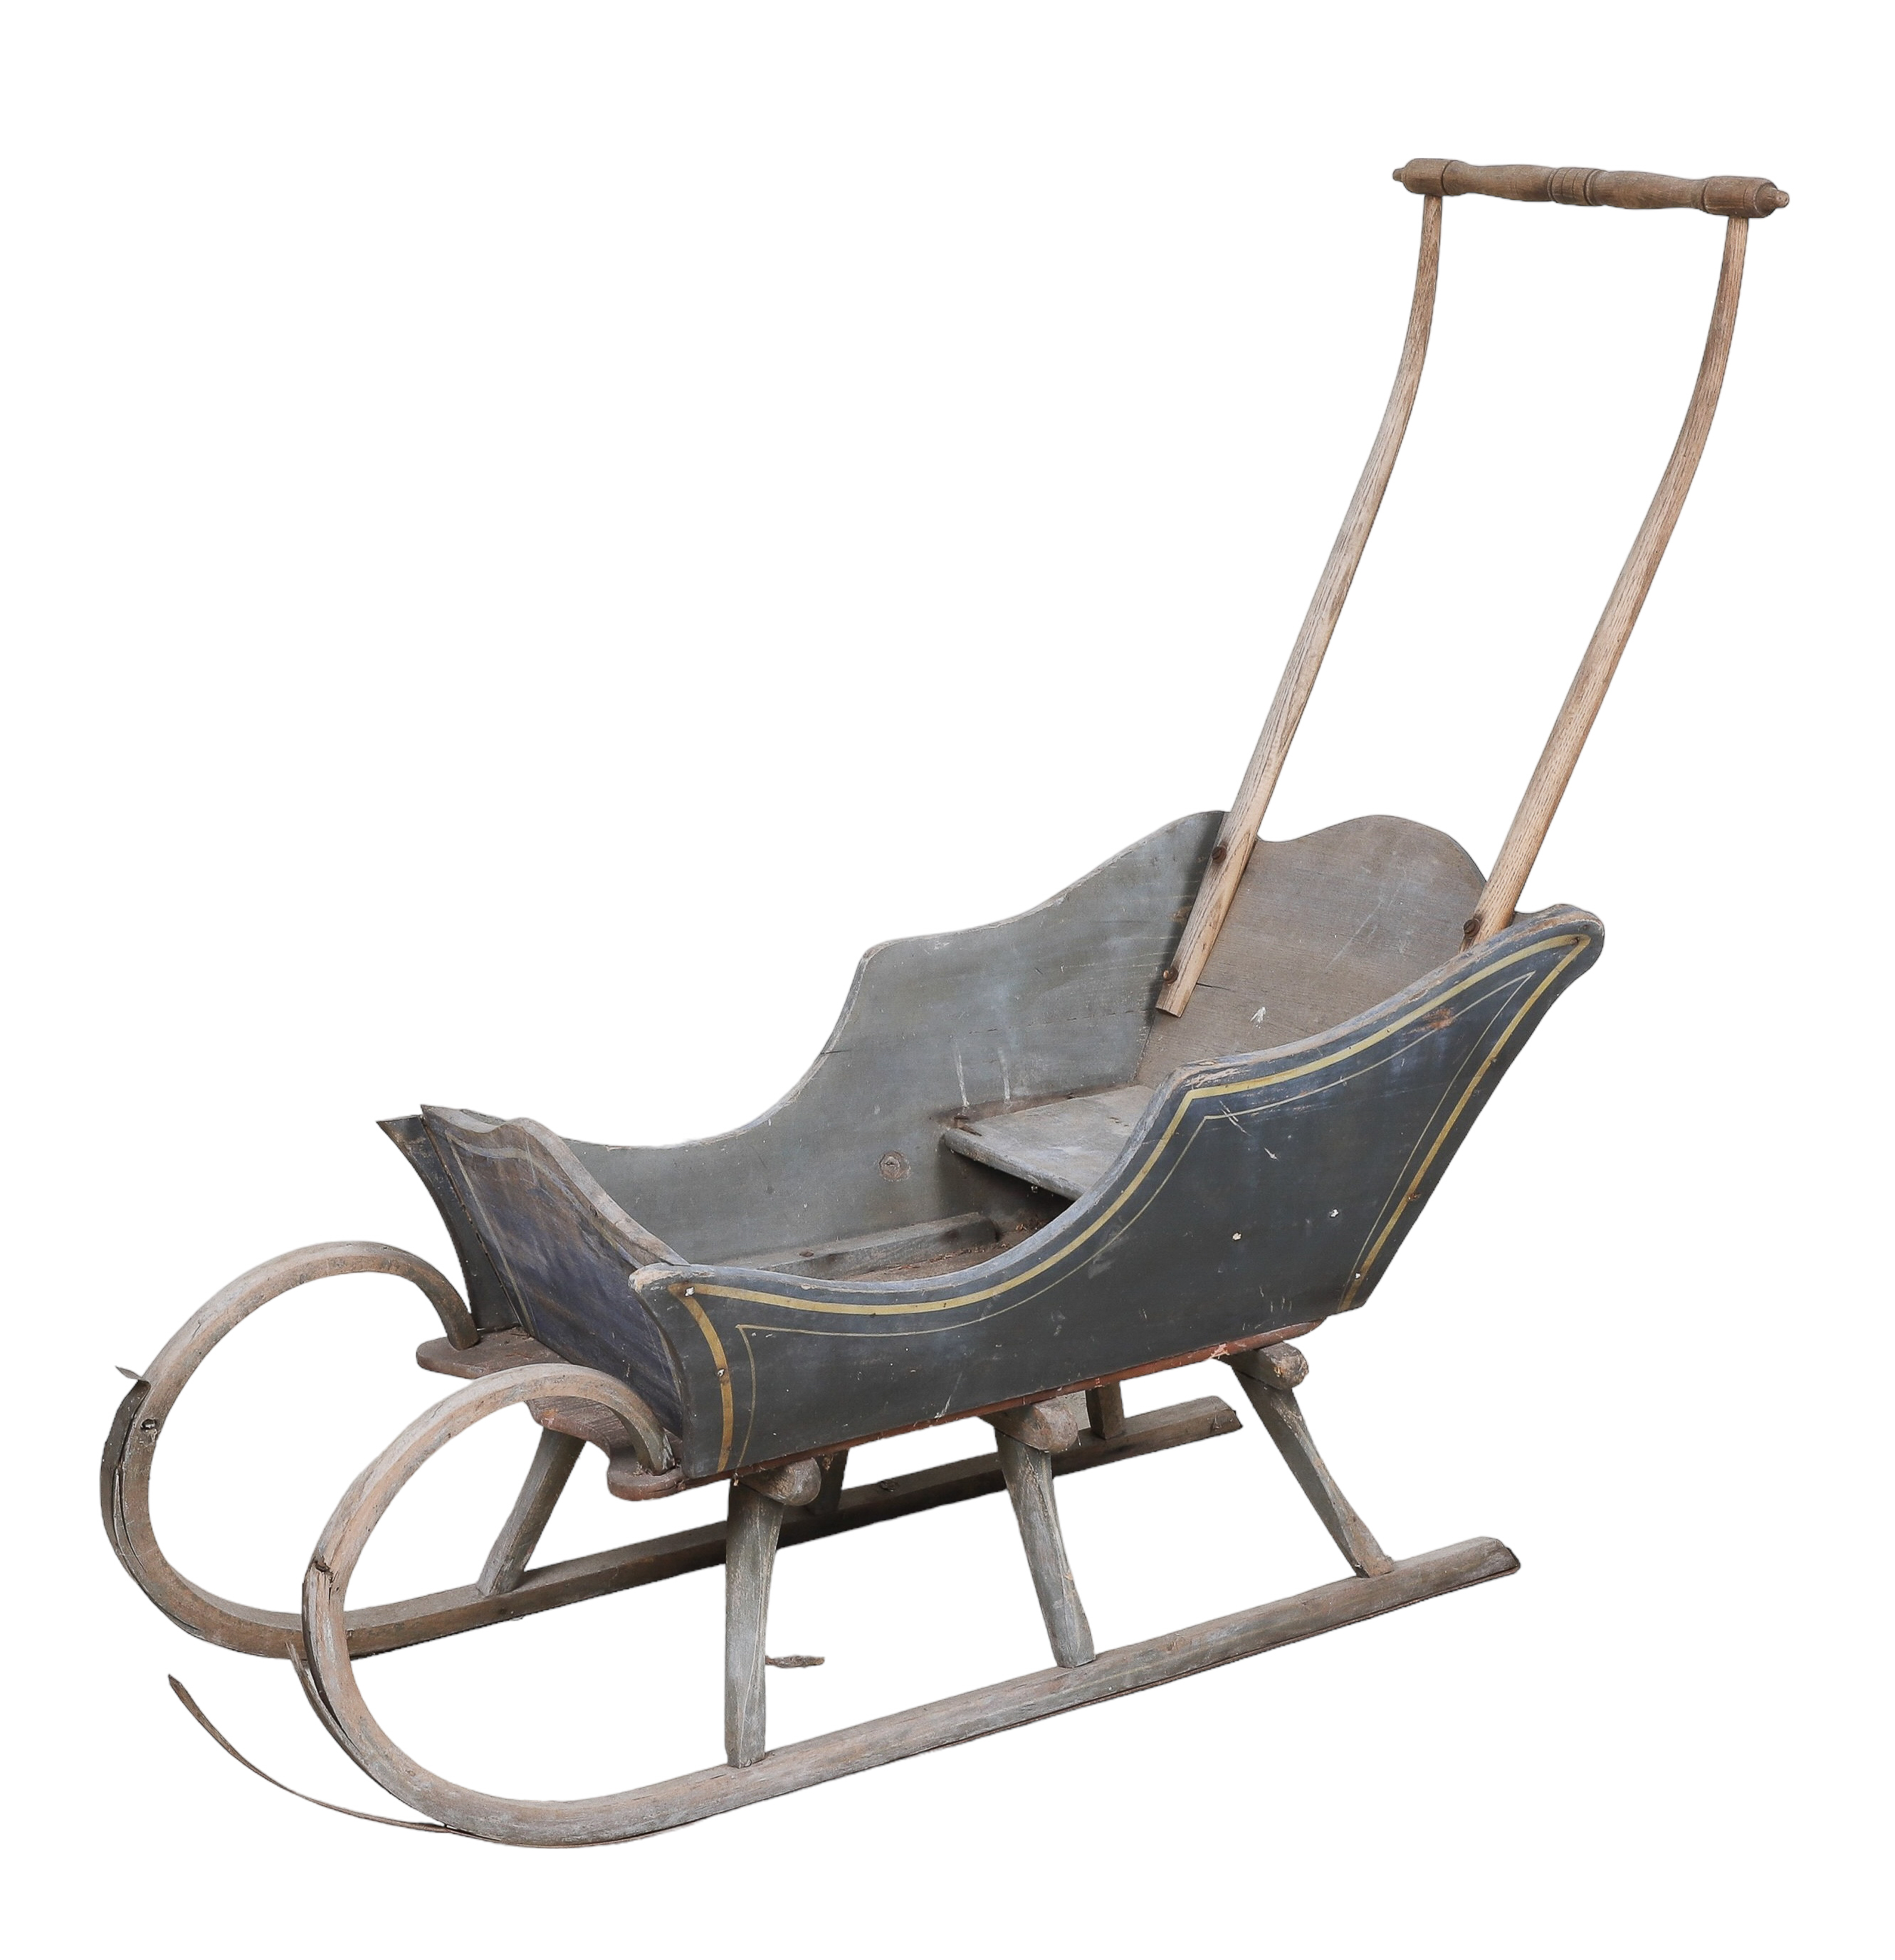 Childs push sleigh in old blue 2e18d8